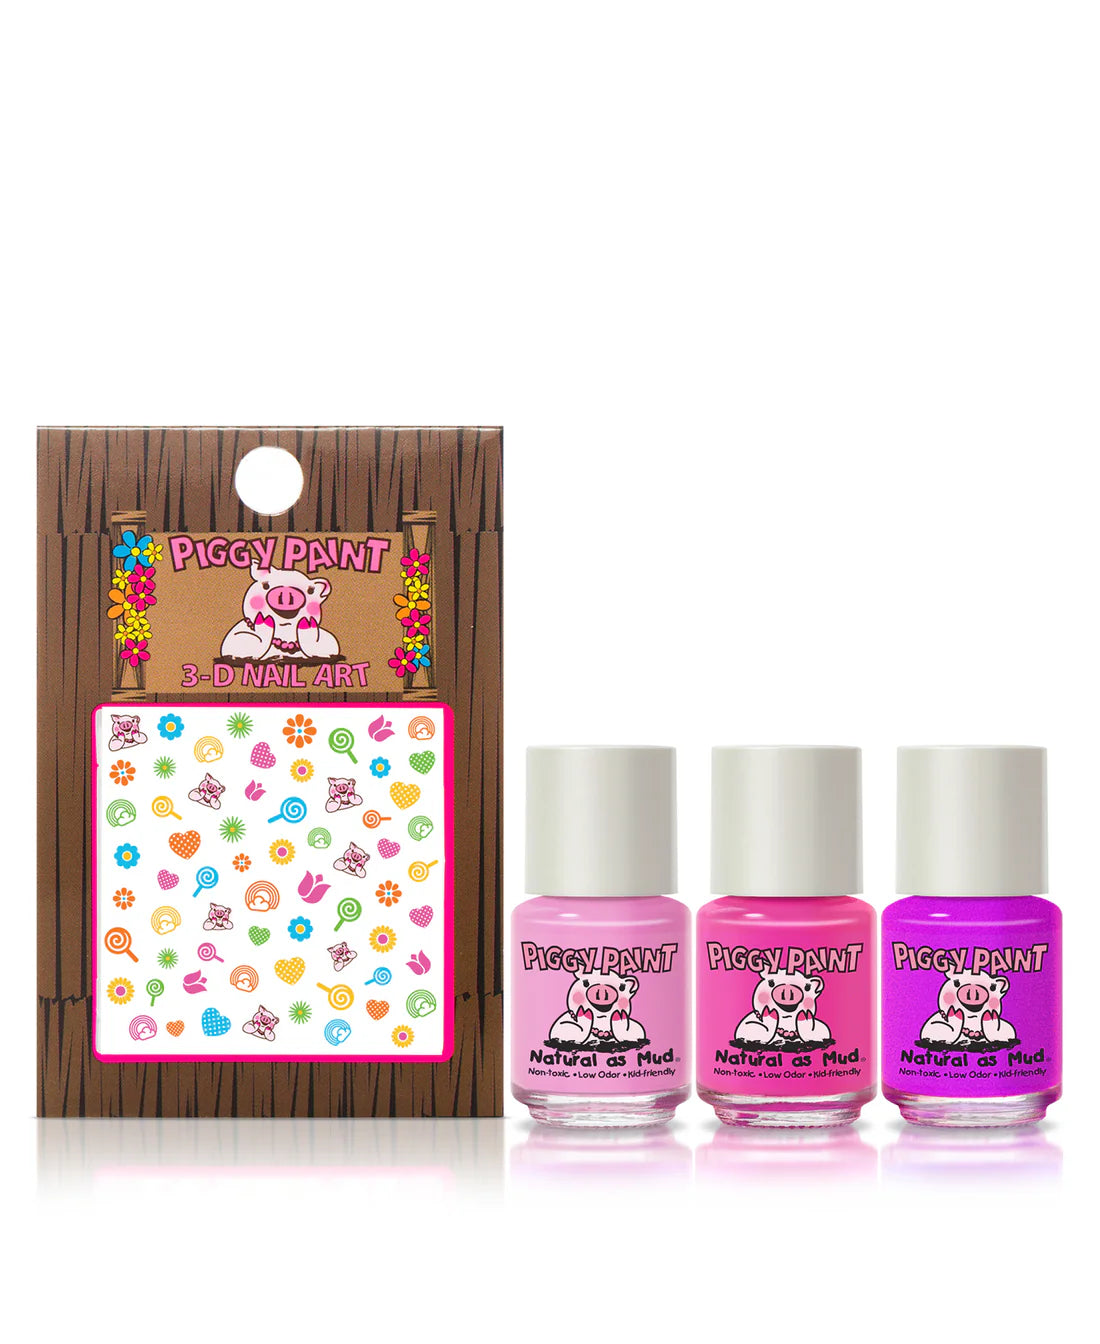 PIGGY PAINT NAIL POLISH FOR FOR KIDS AND ADULTS RAINBOW PARTY GIFT SET